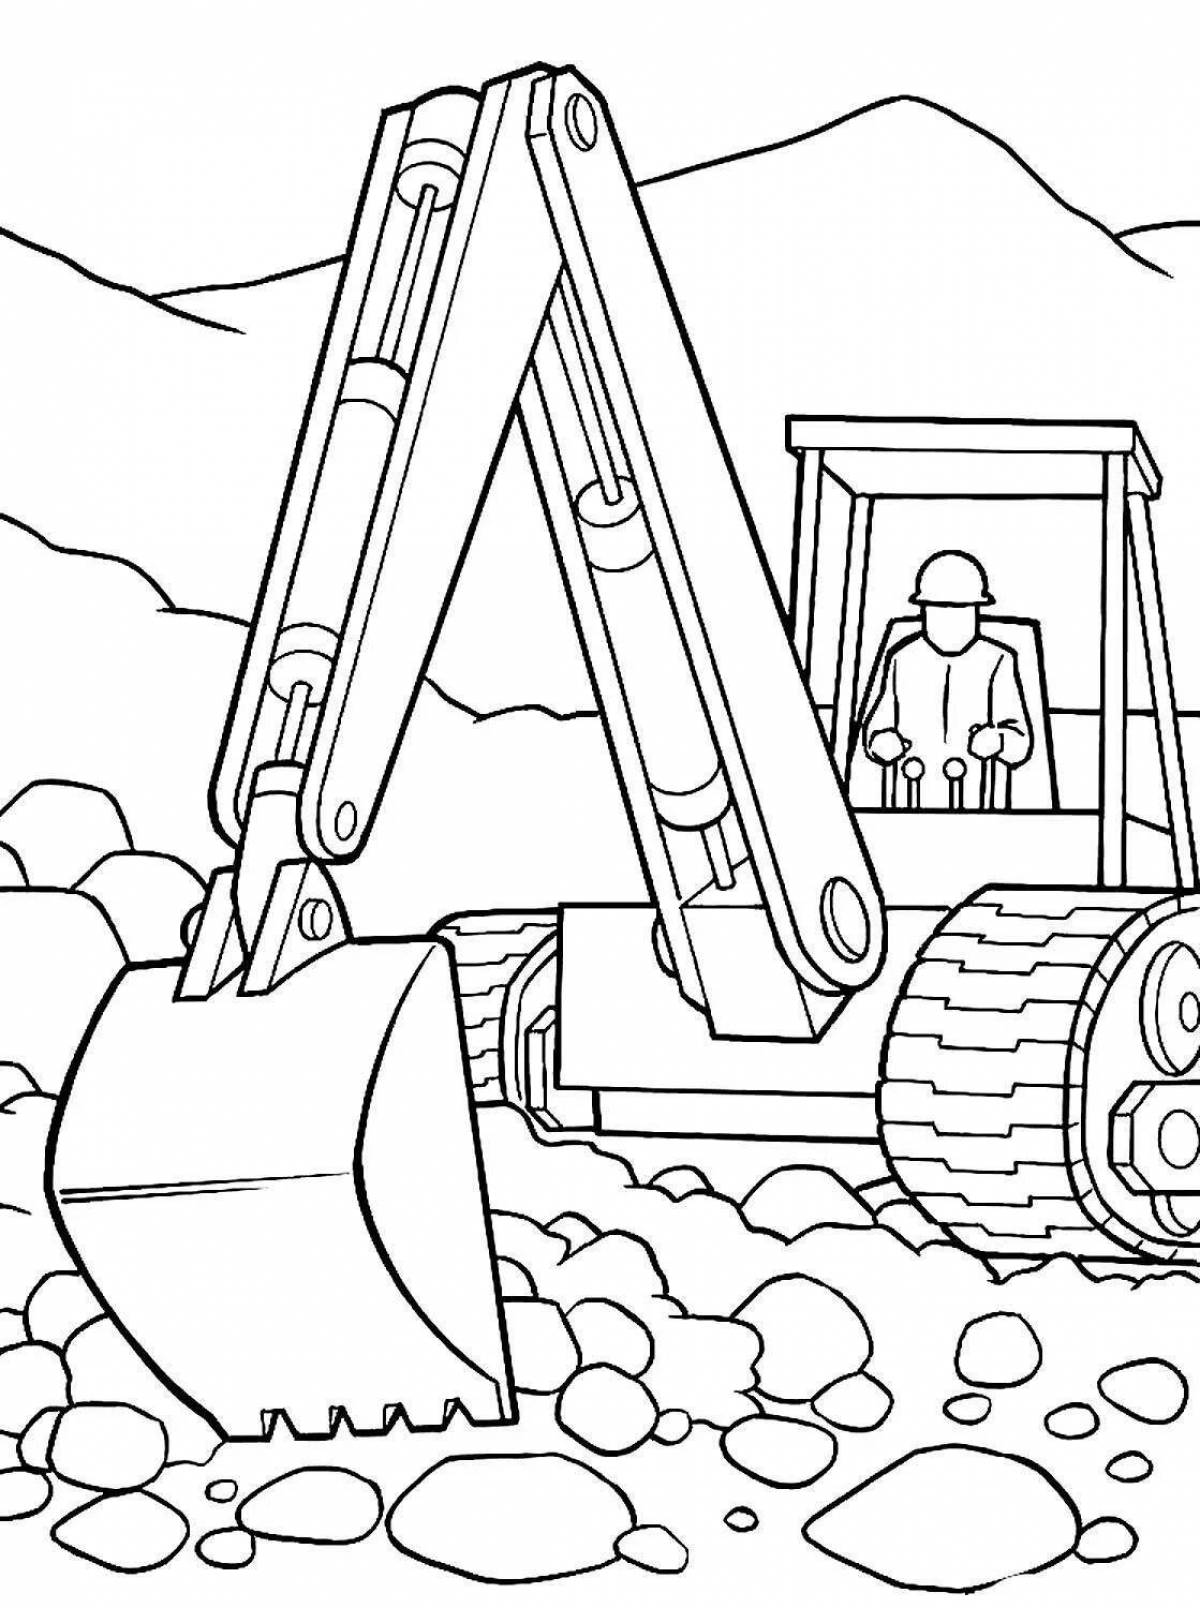 Incredible excavator coloring book for kids